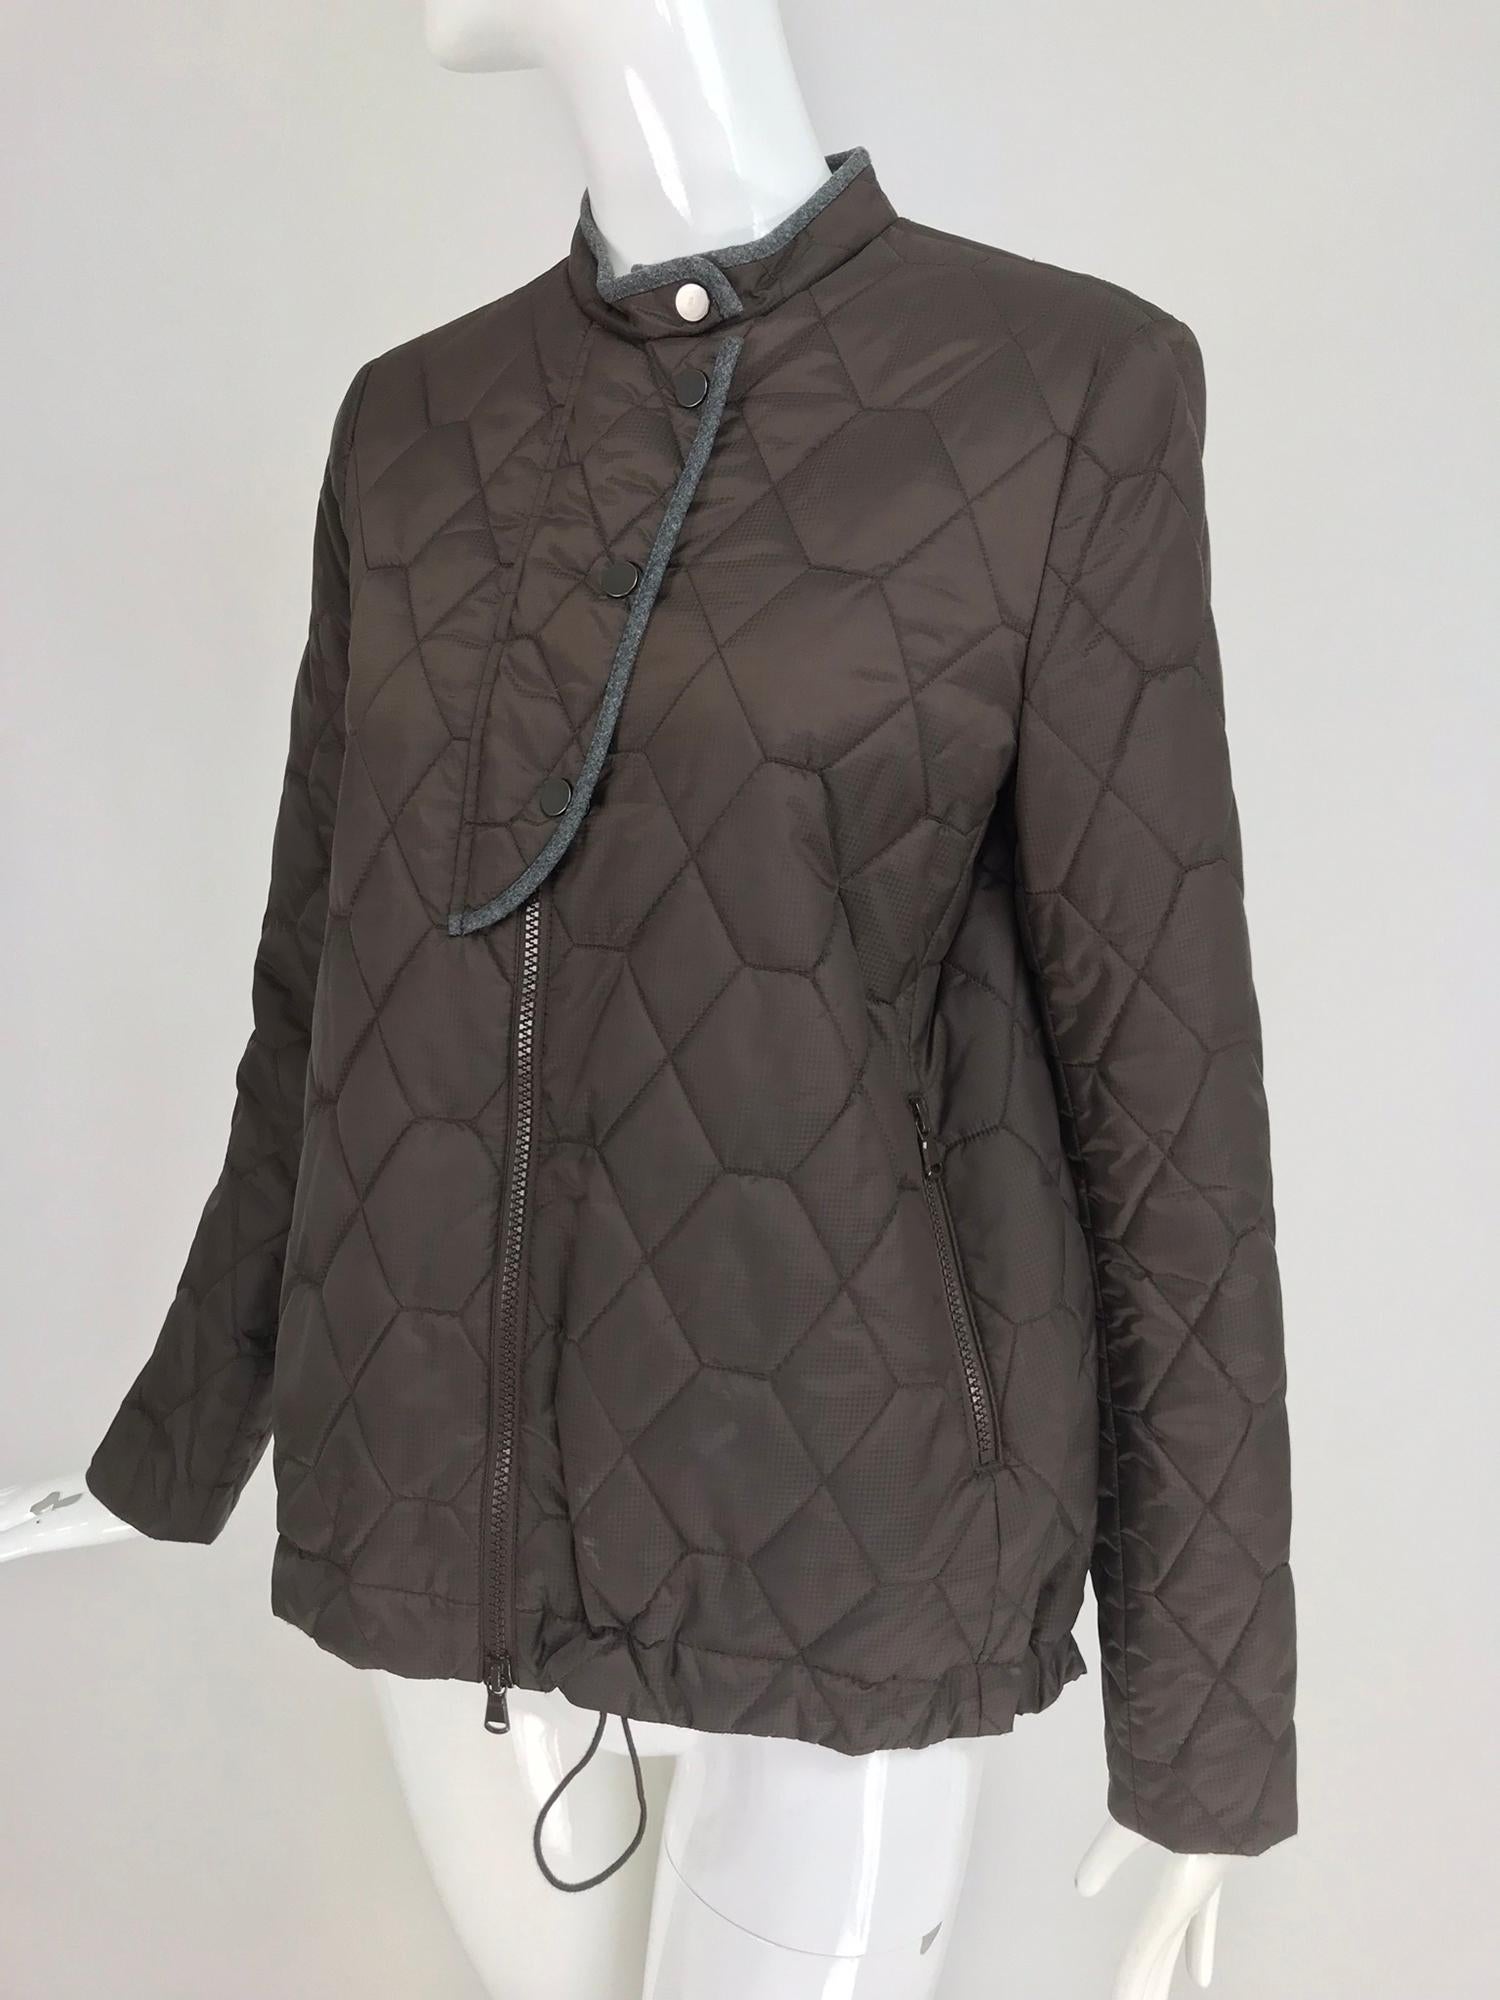 Brunello Cucinelli Chocolate Brown geometric pattern Quilted Sport Jacket. Zip front jacket, has a snap chest flap at the top. The jacket has a draw cord with toggle hem. Lower front zipper closure pockets. The zippers are brown and chunky.